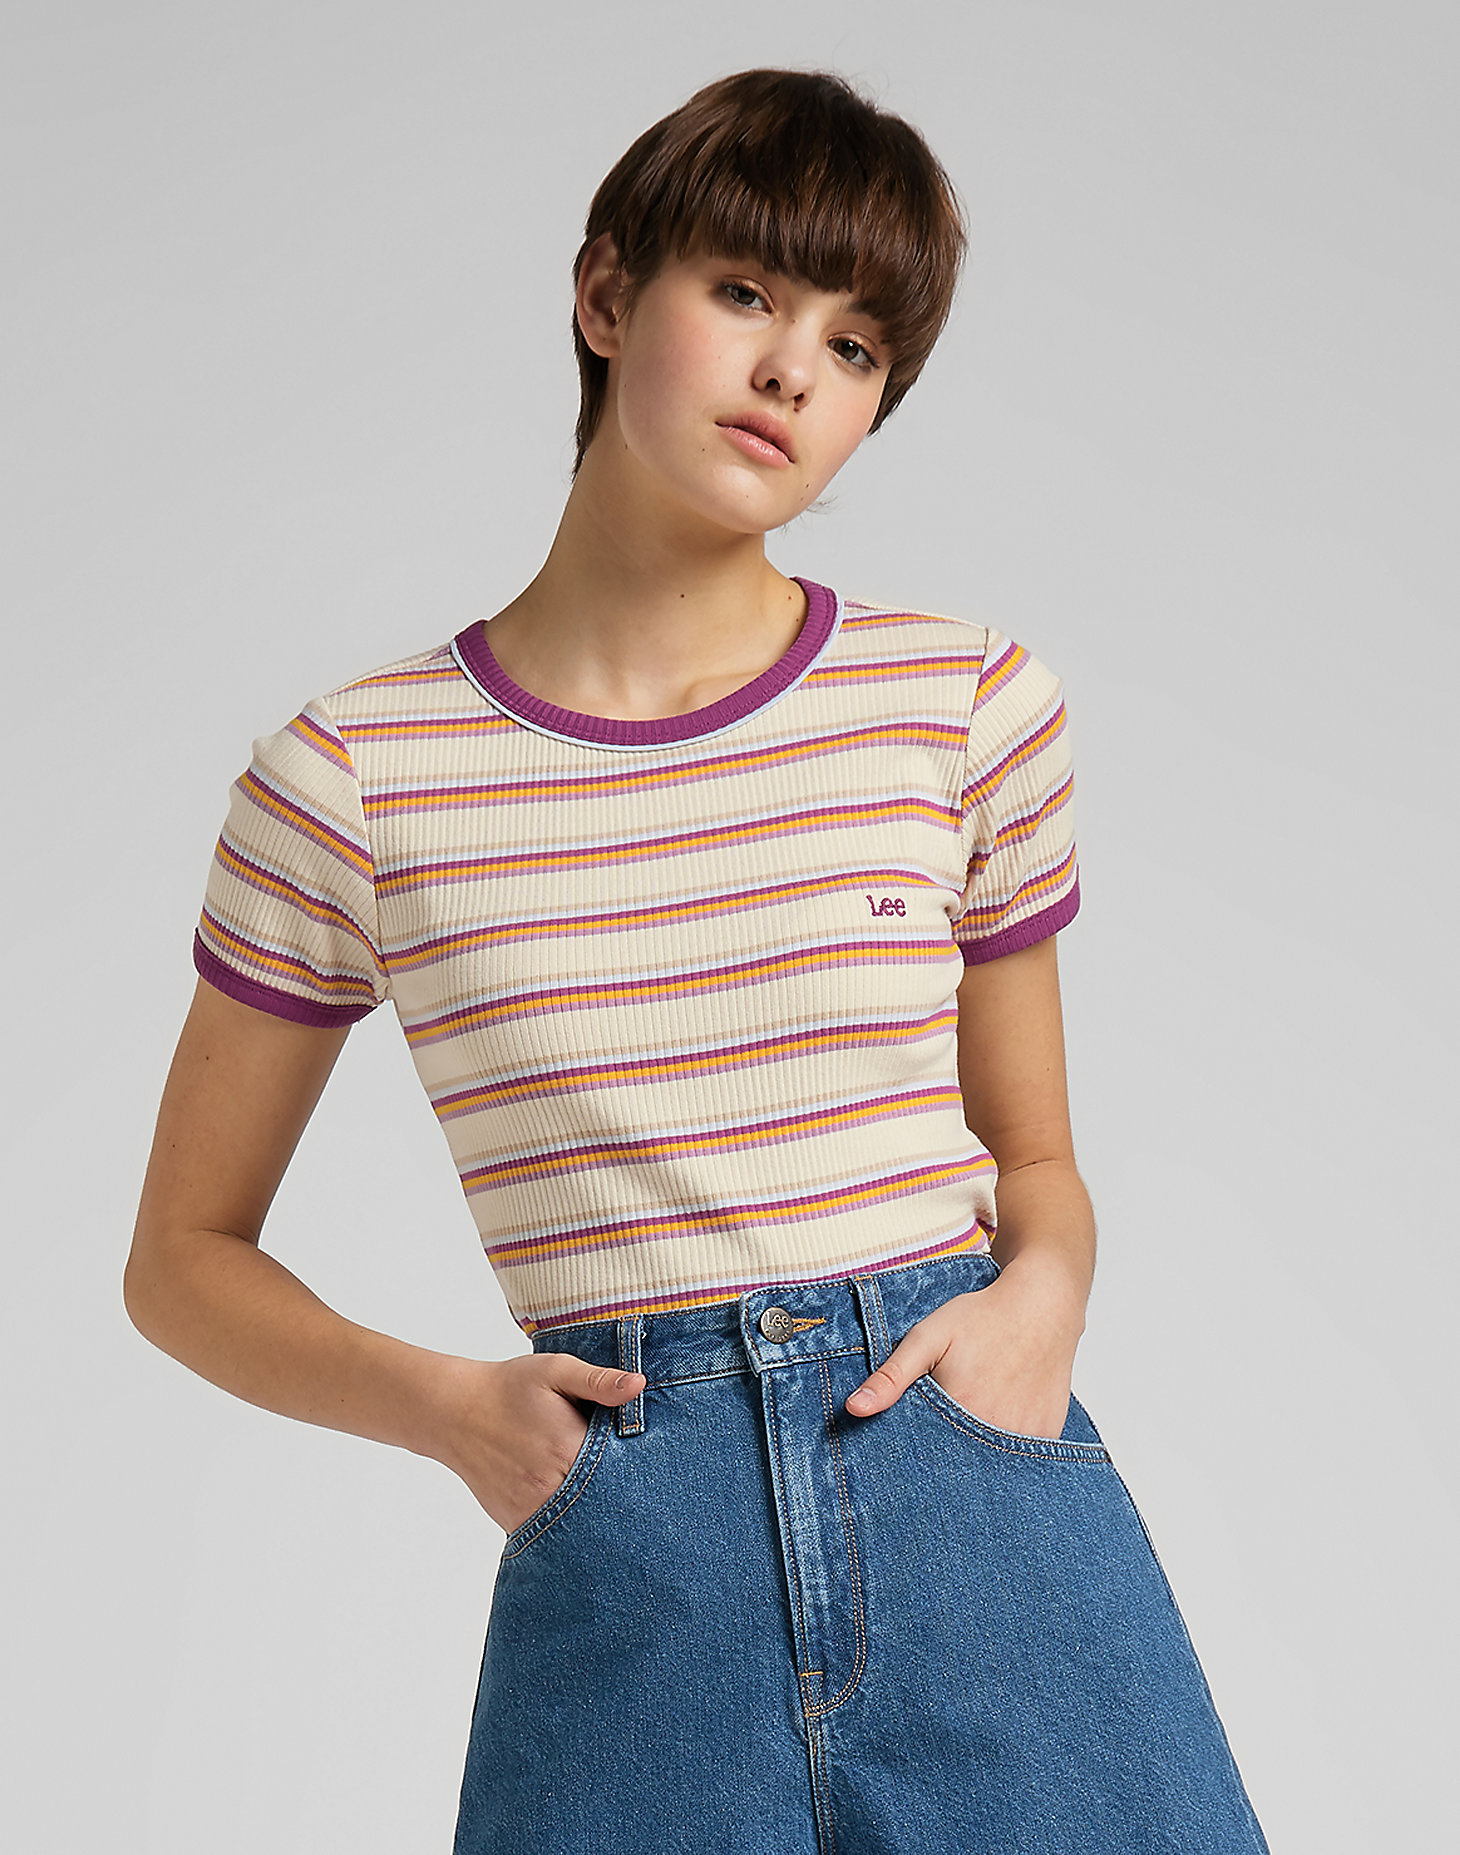 Striped Ribbed Tee in Golden Beam alternative view 1